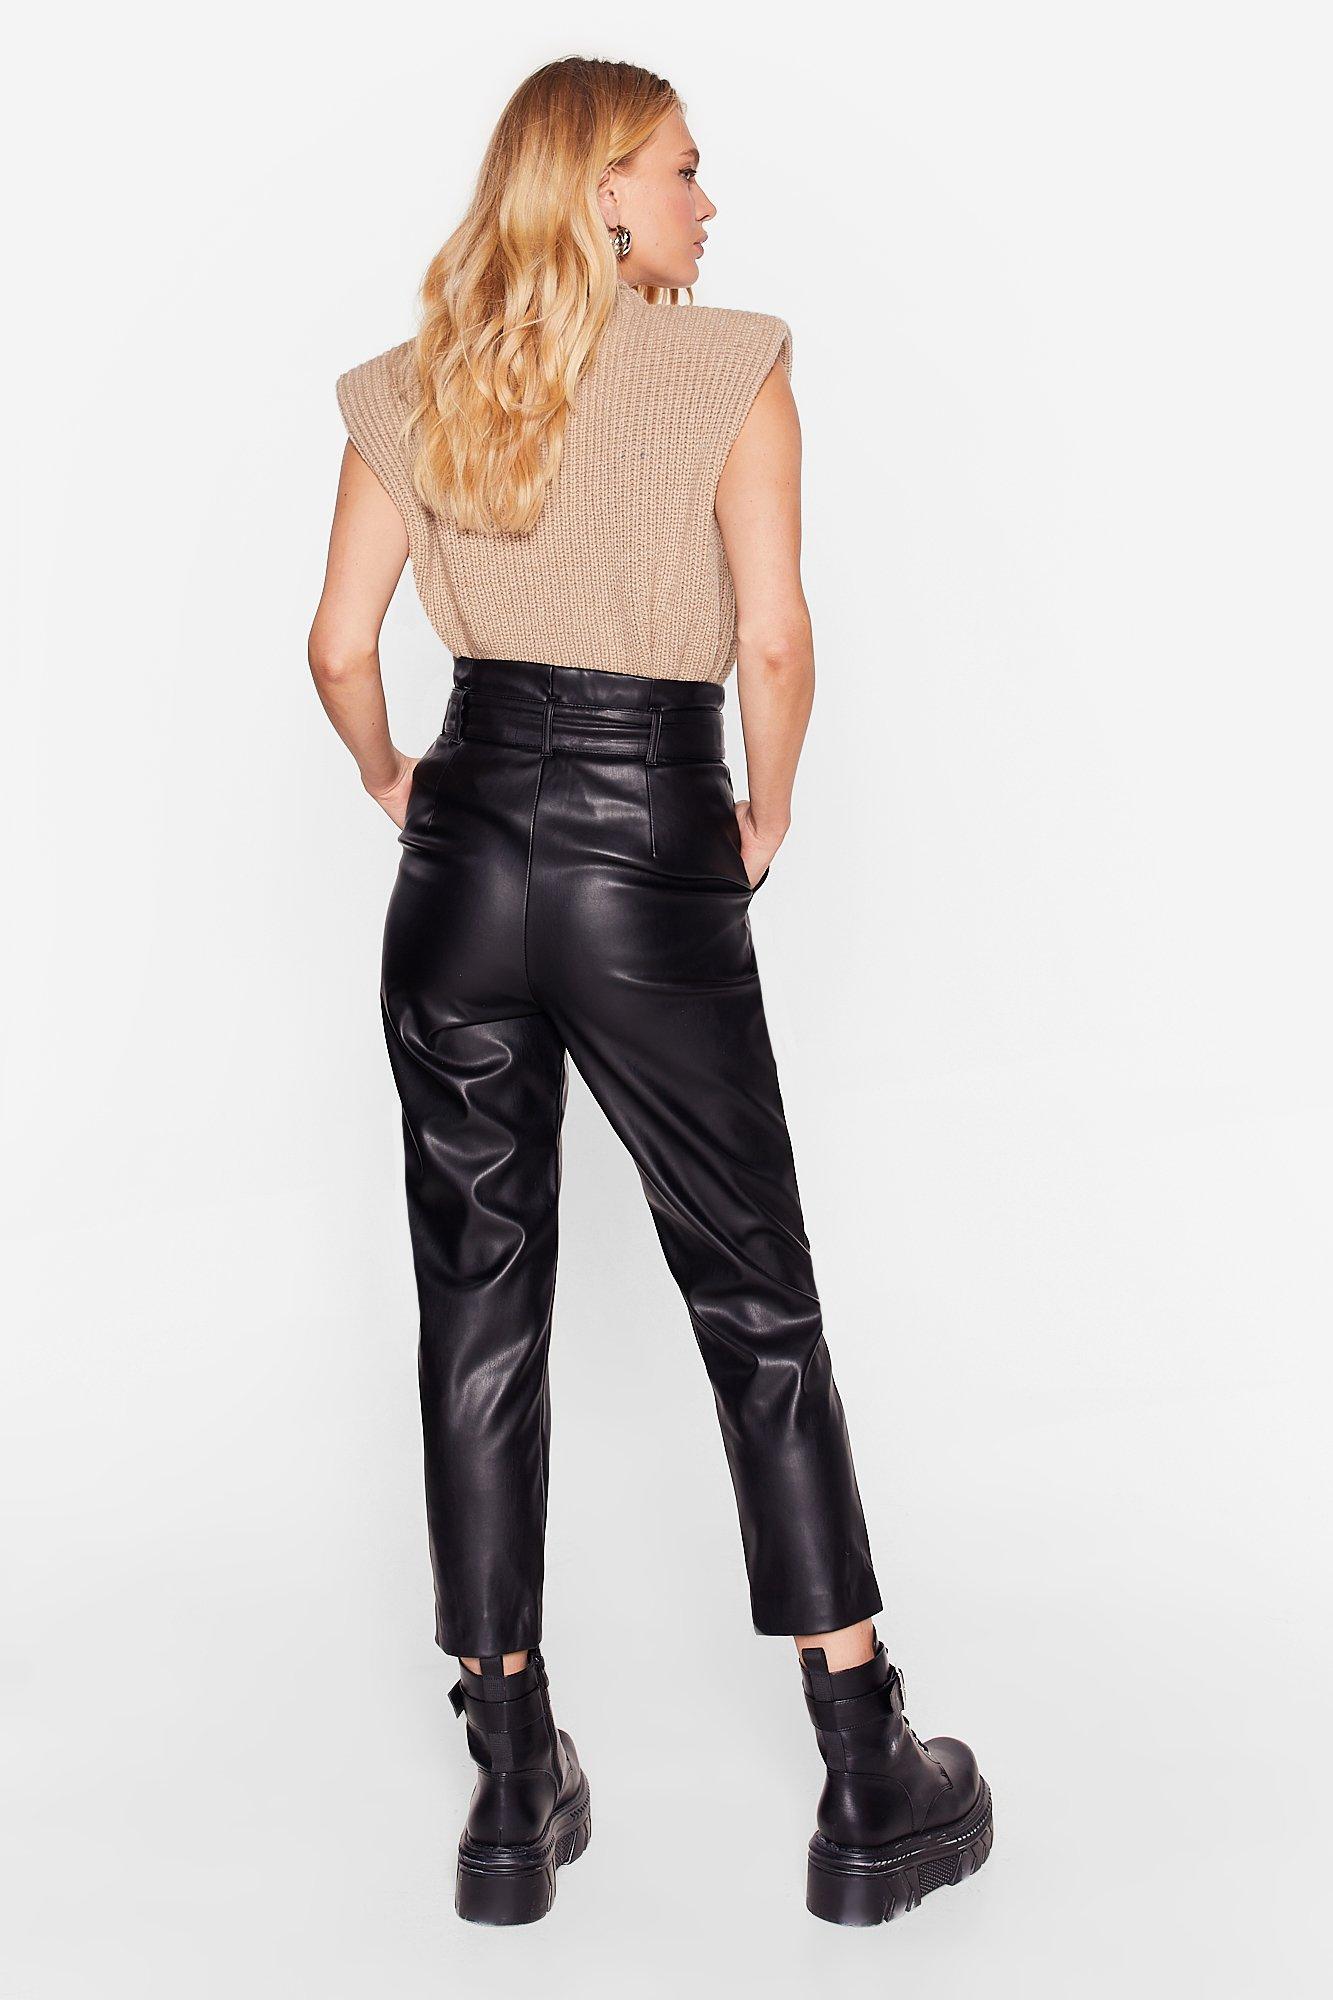 Pardon Luchtpost krom Make a Note Paperbag Faux Leather Pants | Nasty Gal